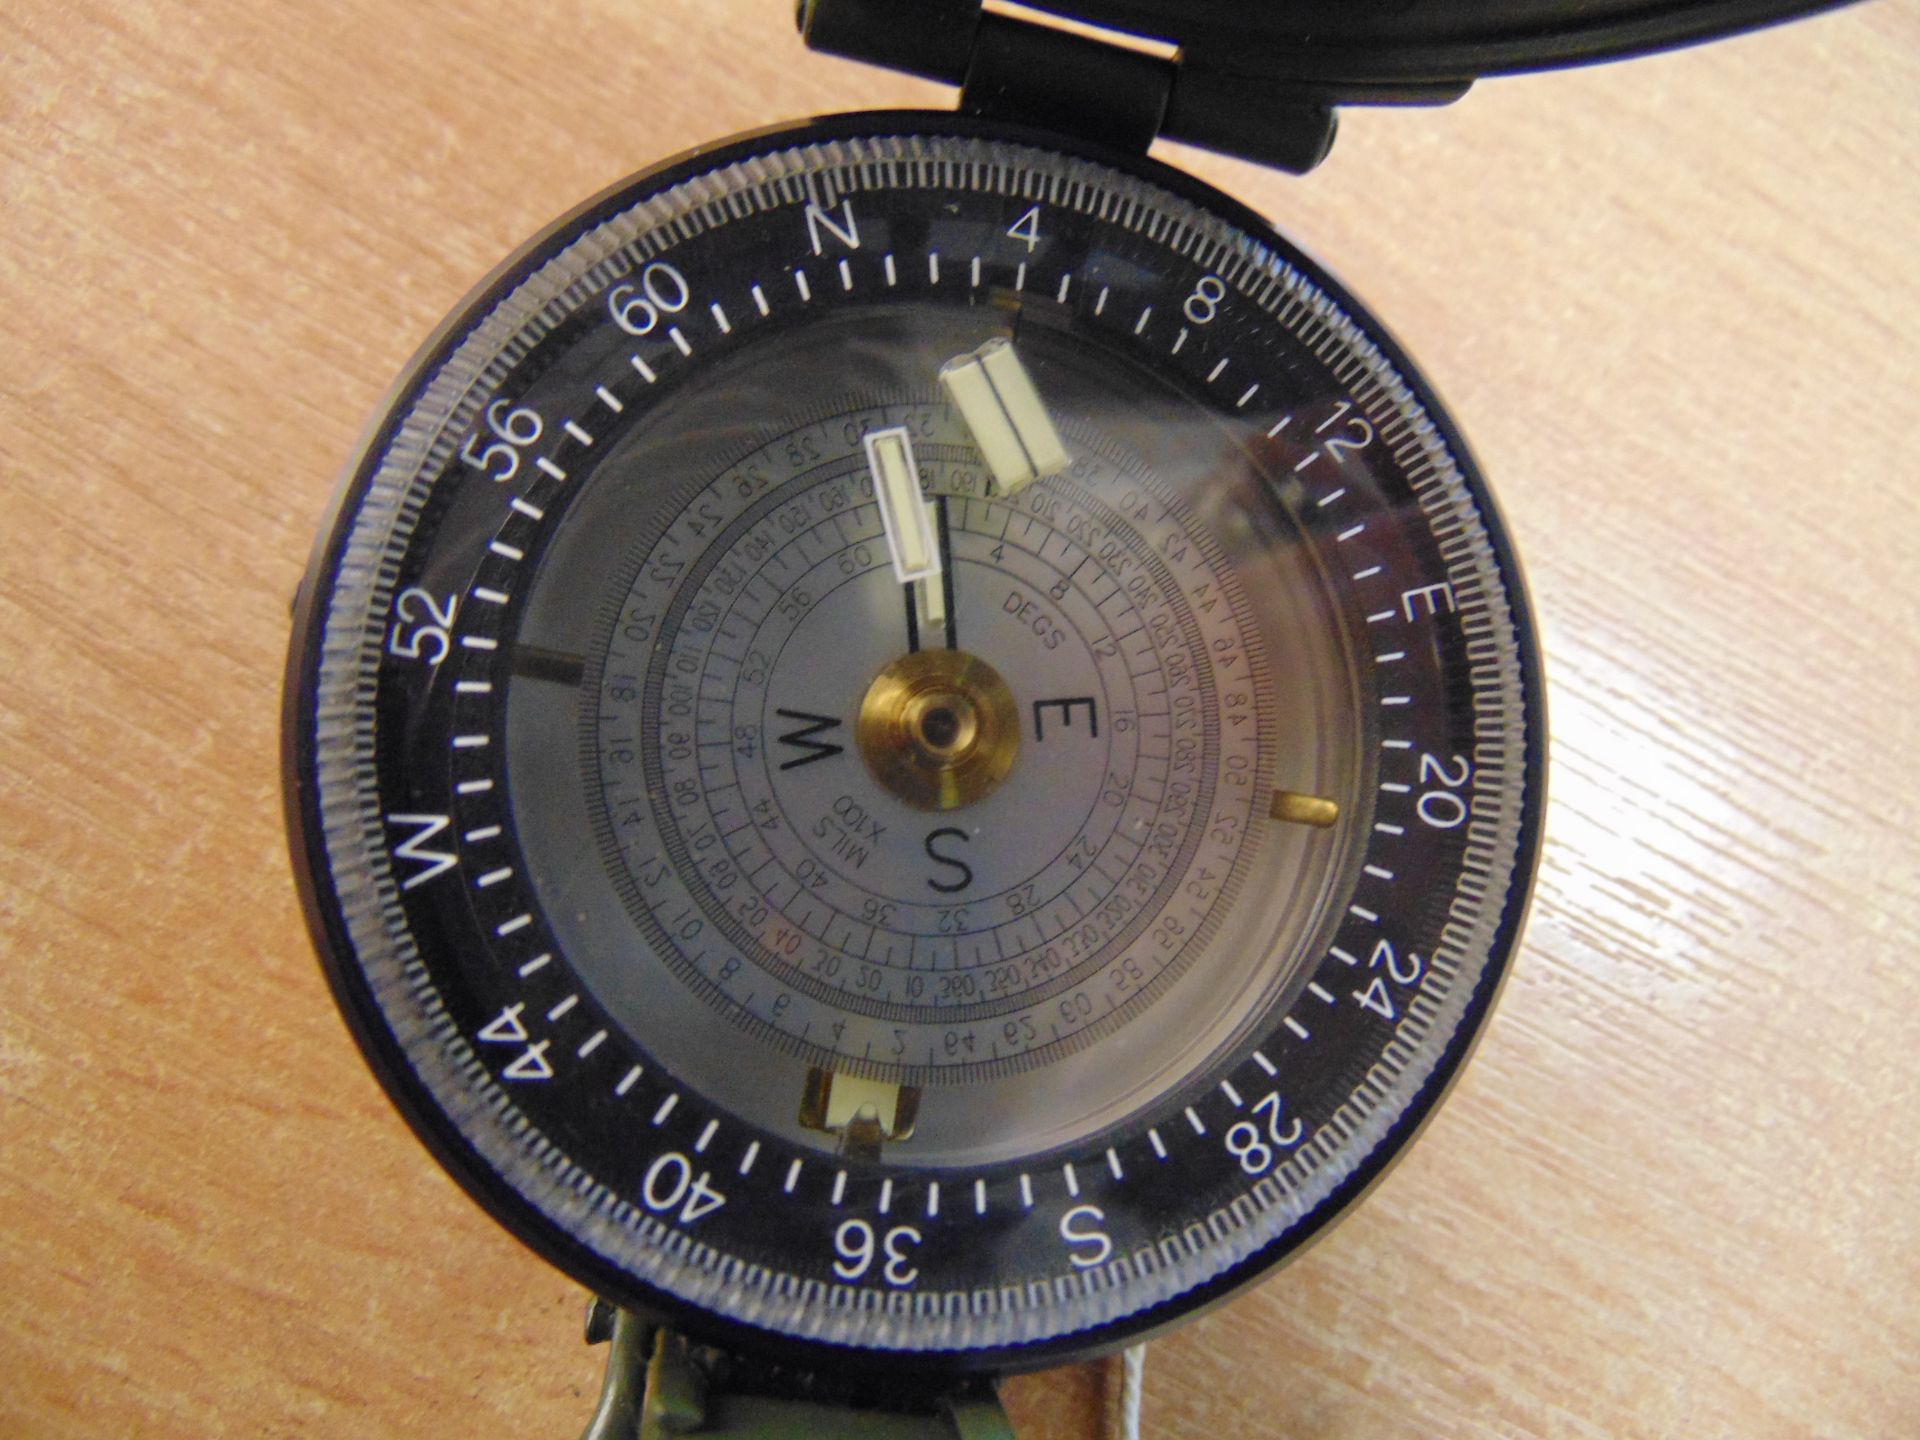 UNISSUED FRANCIS BAKER M88 COMPASS - Image 5 of 5